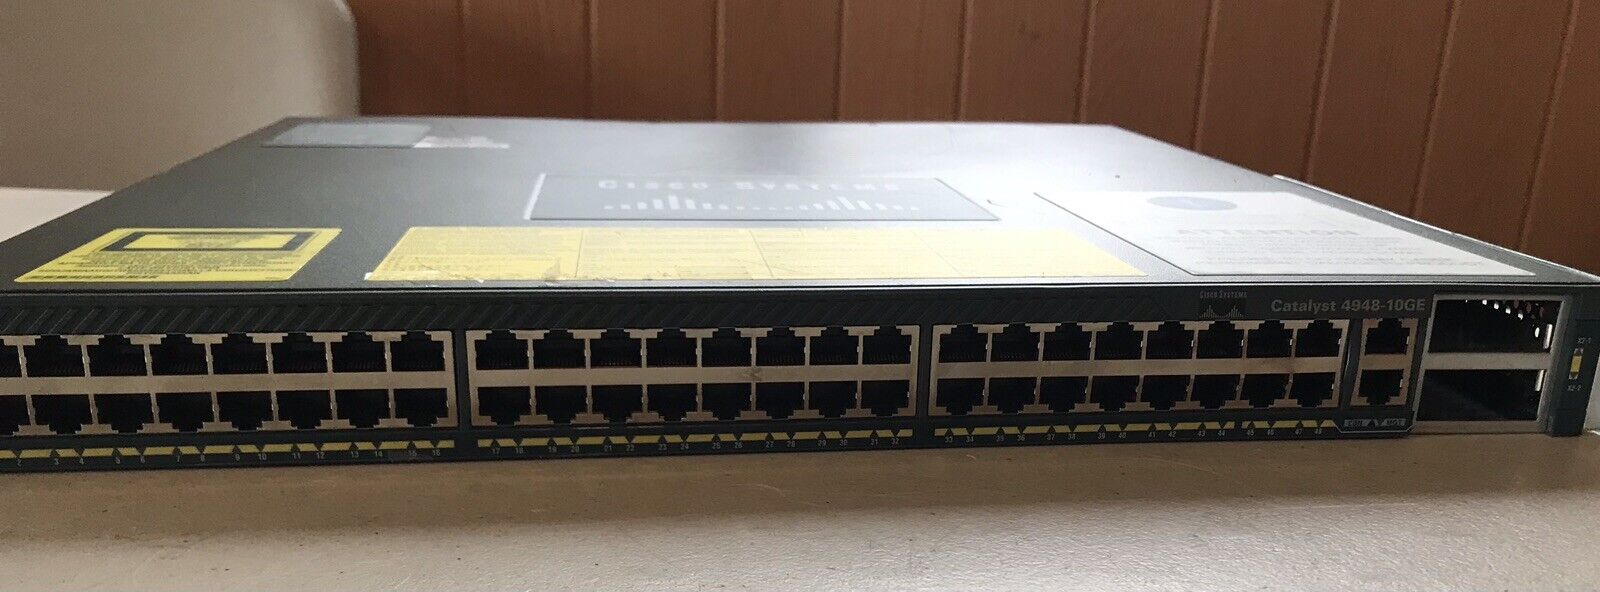 Cisco  Catalyst WS-C4948-10GE 48-Ports Rack-mountable Switch Managed